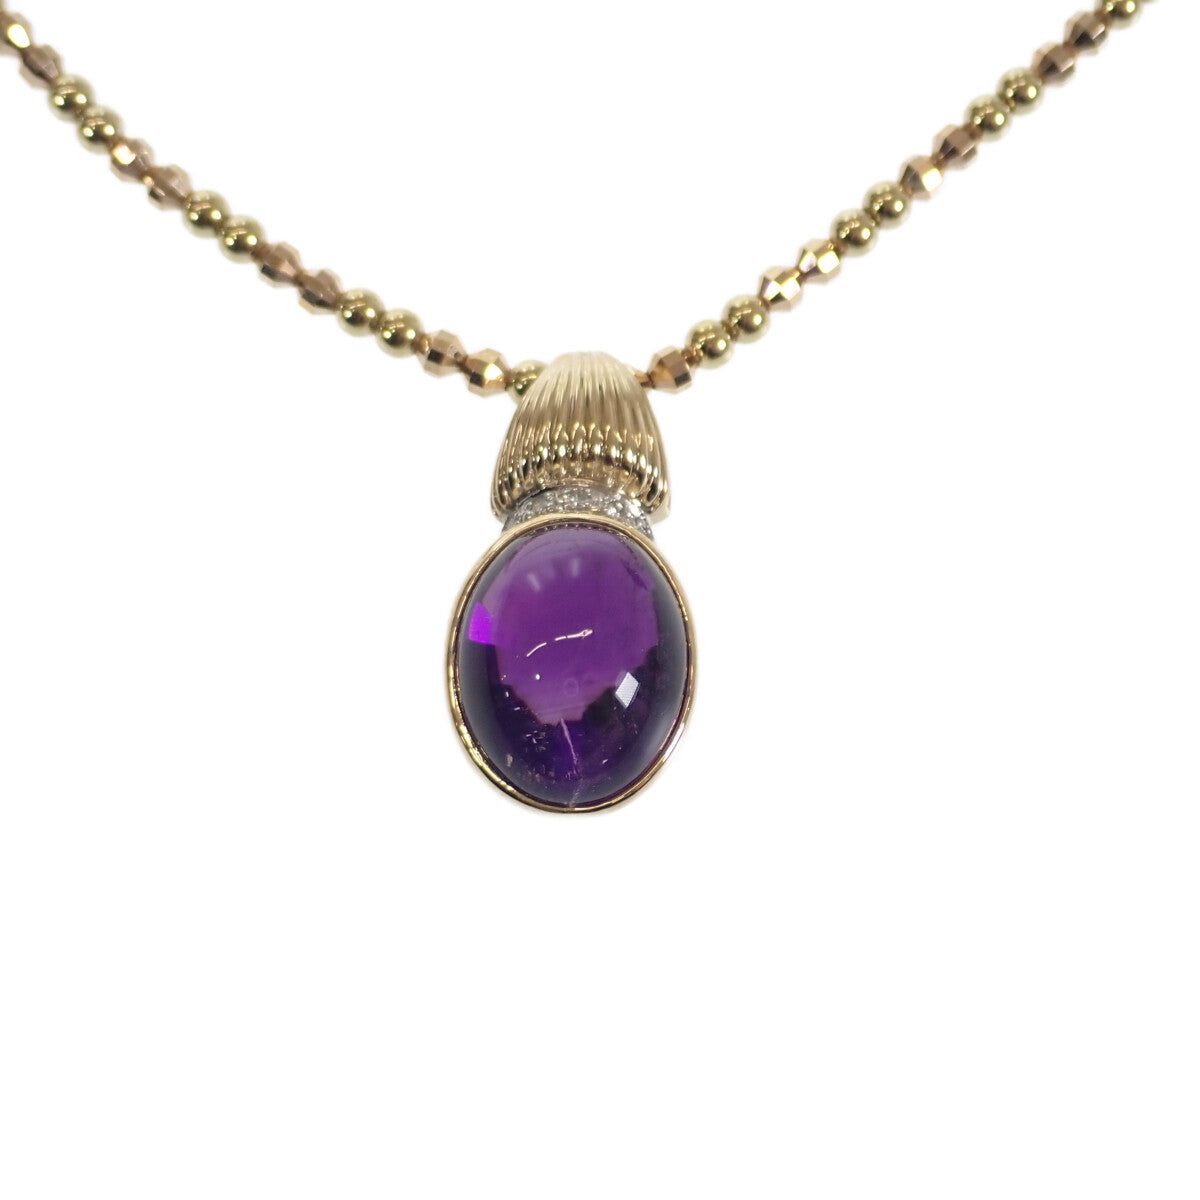 [LuxUness]  Ladies' K18YG and Pt900 Necklace with Amethyst (12.89ct) and Diamond (0.05ct) in Gold – Used  in Excellent condition